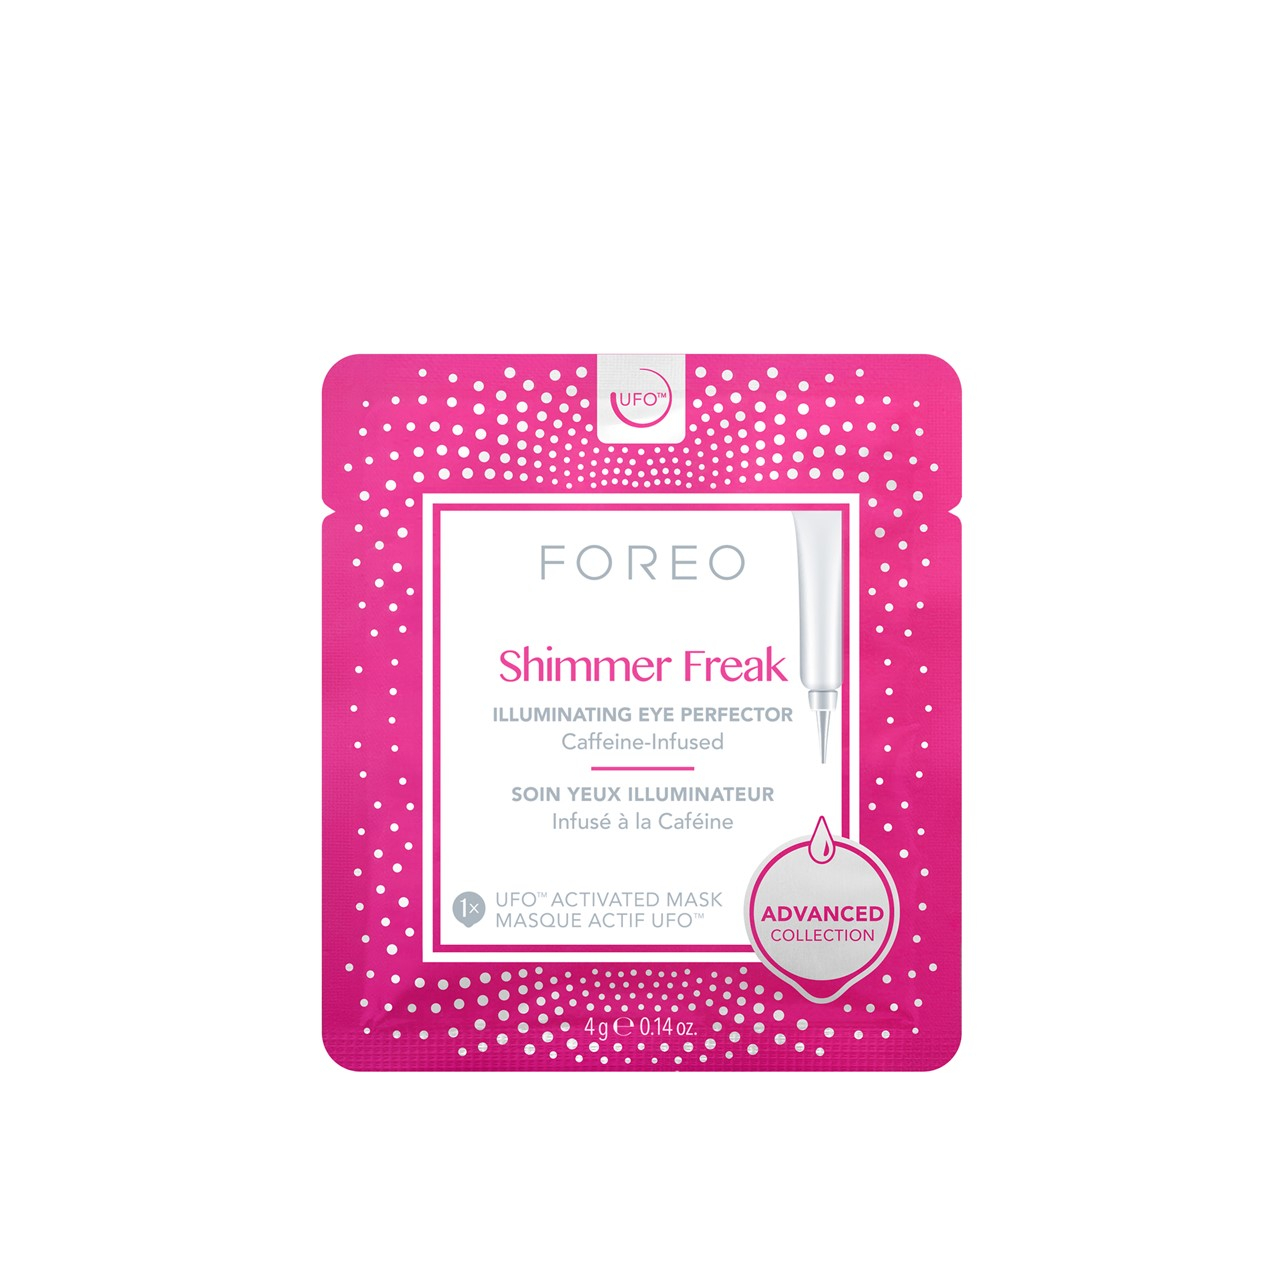 FOREO UFO™ Activated Facial Mask Shimmer Freak 6x4g (6x0.14oz)